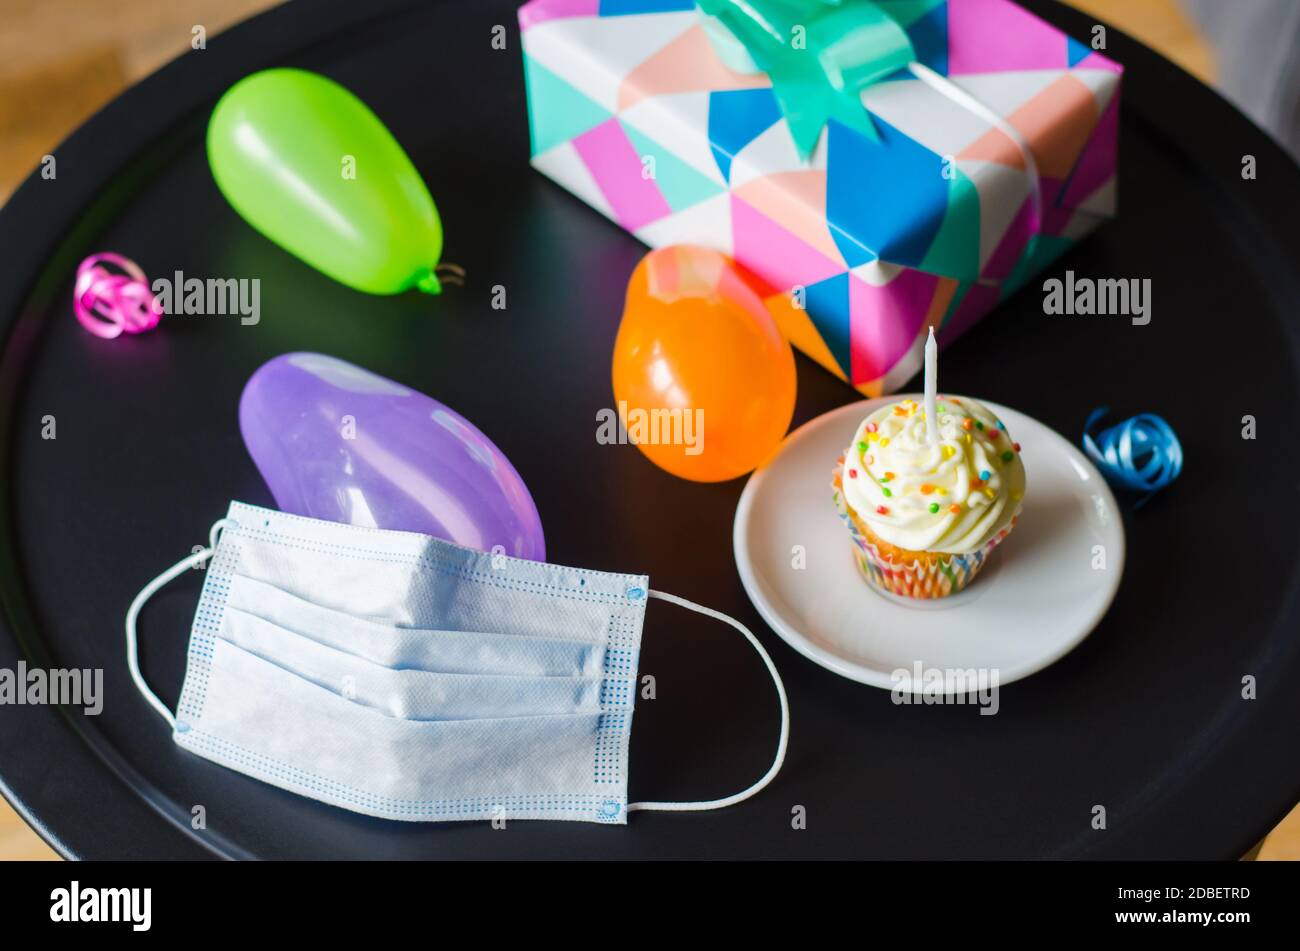 Quarantine birthday in isolation. Birthday cupcake with candle, face mask, gifts and holiday accessories. Social distance. Stock Photo